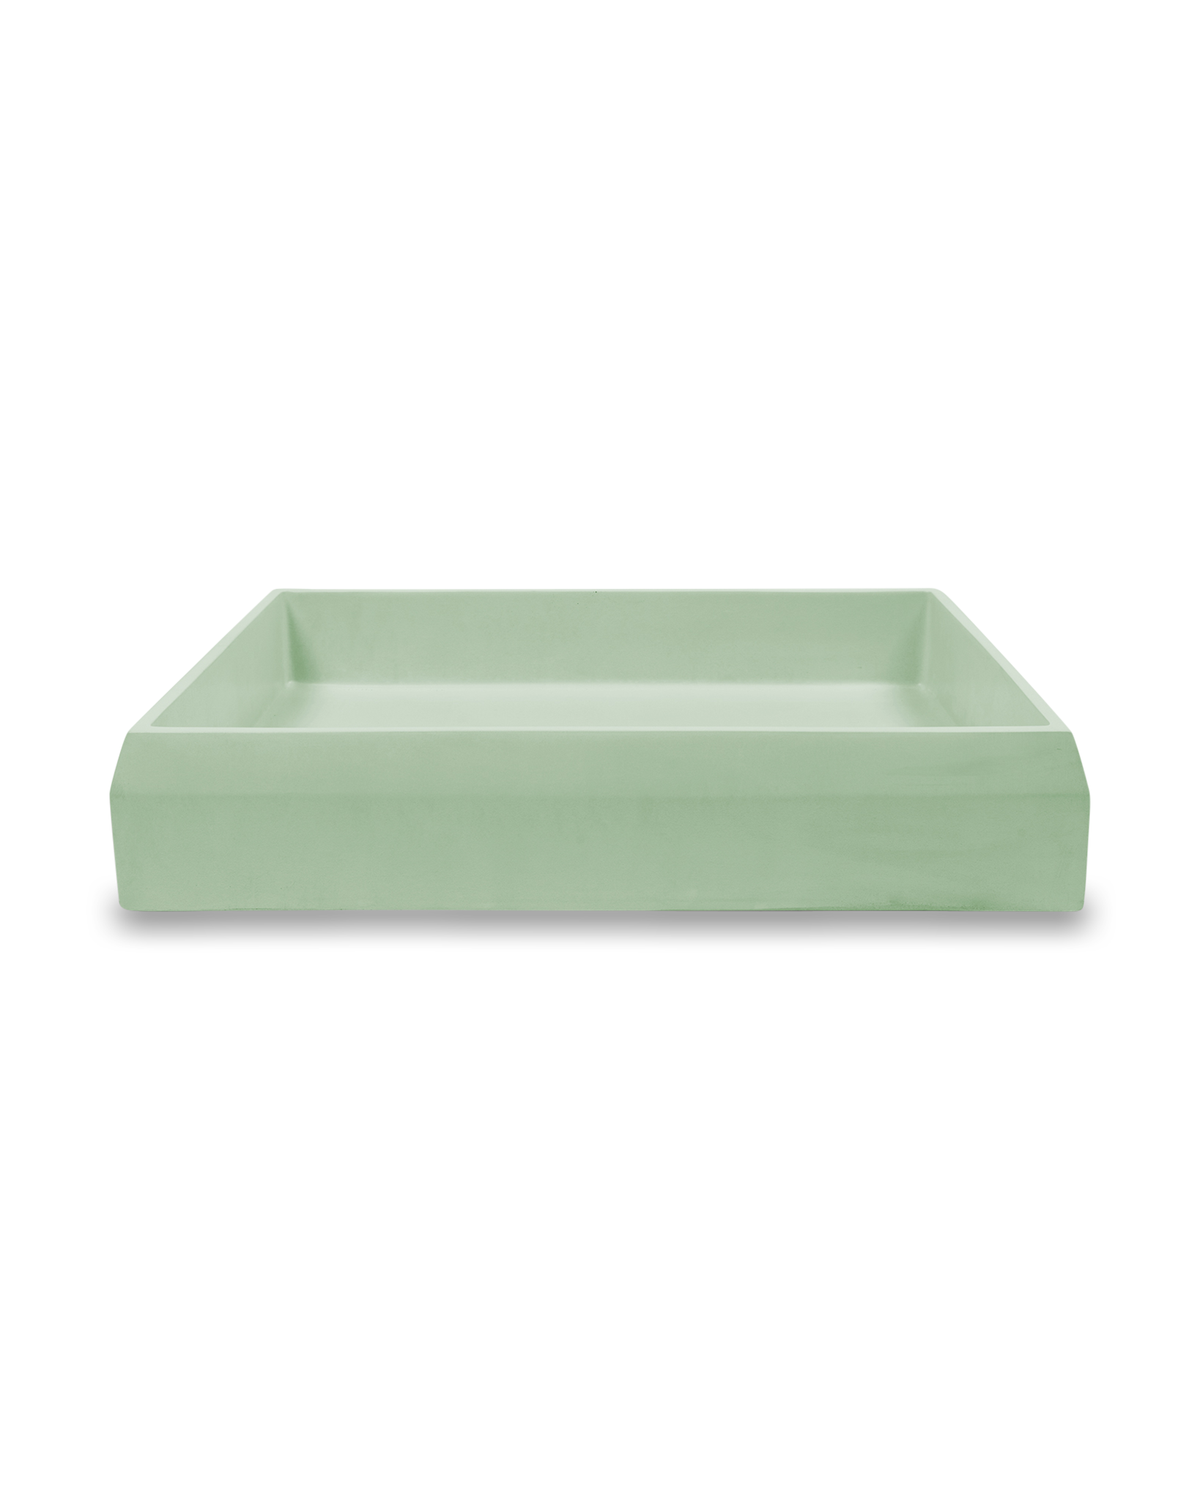 Prism Rectangle Basin - Wall Hung (Mint)